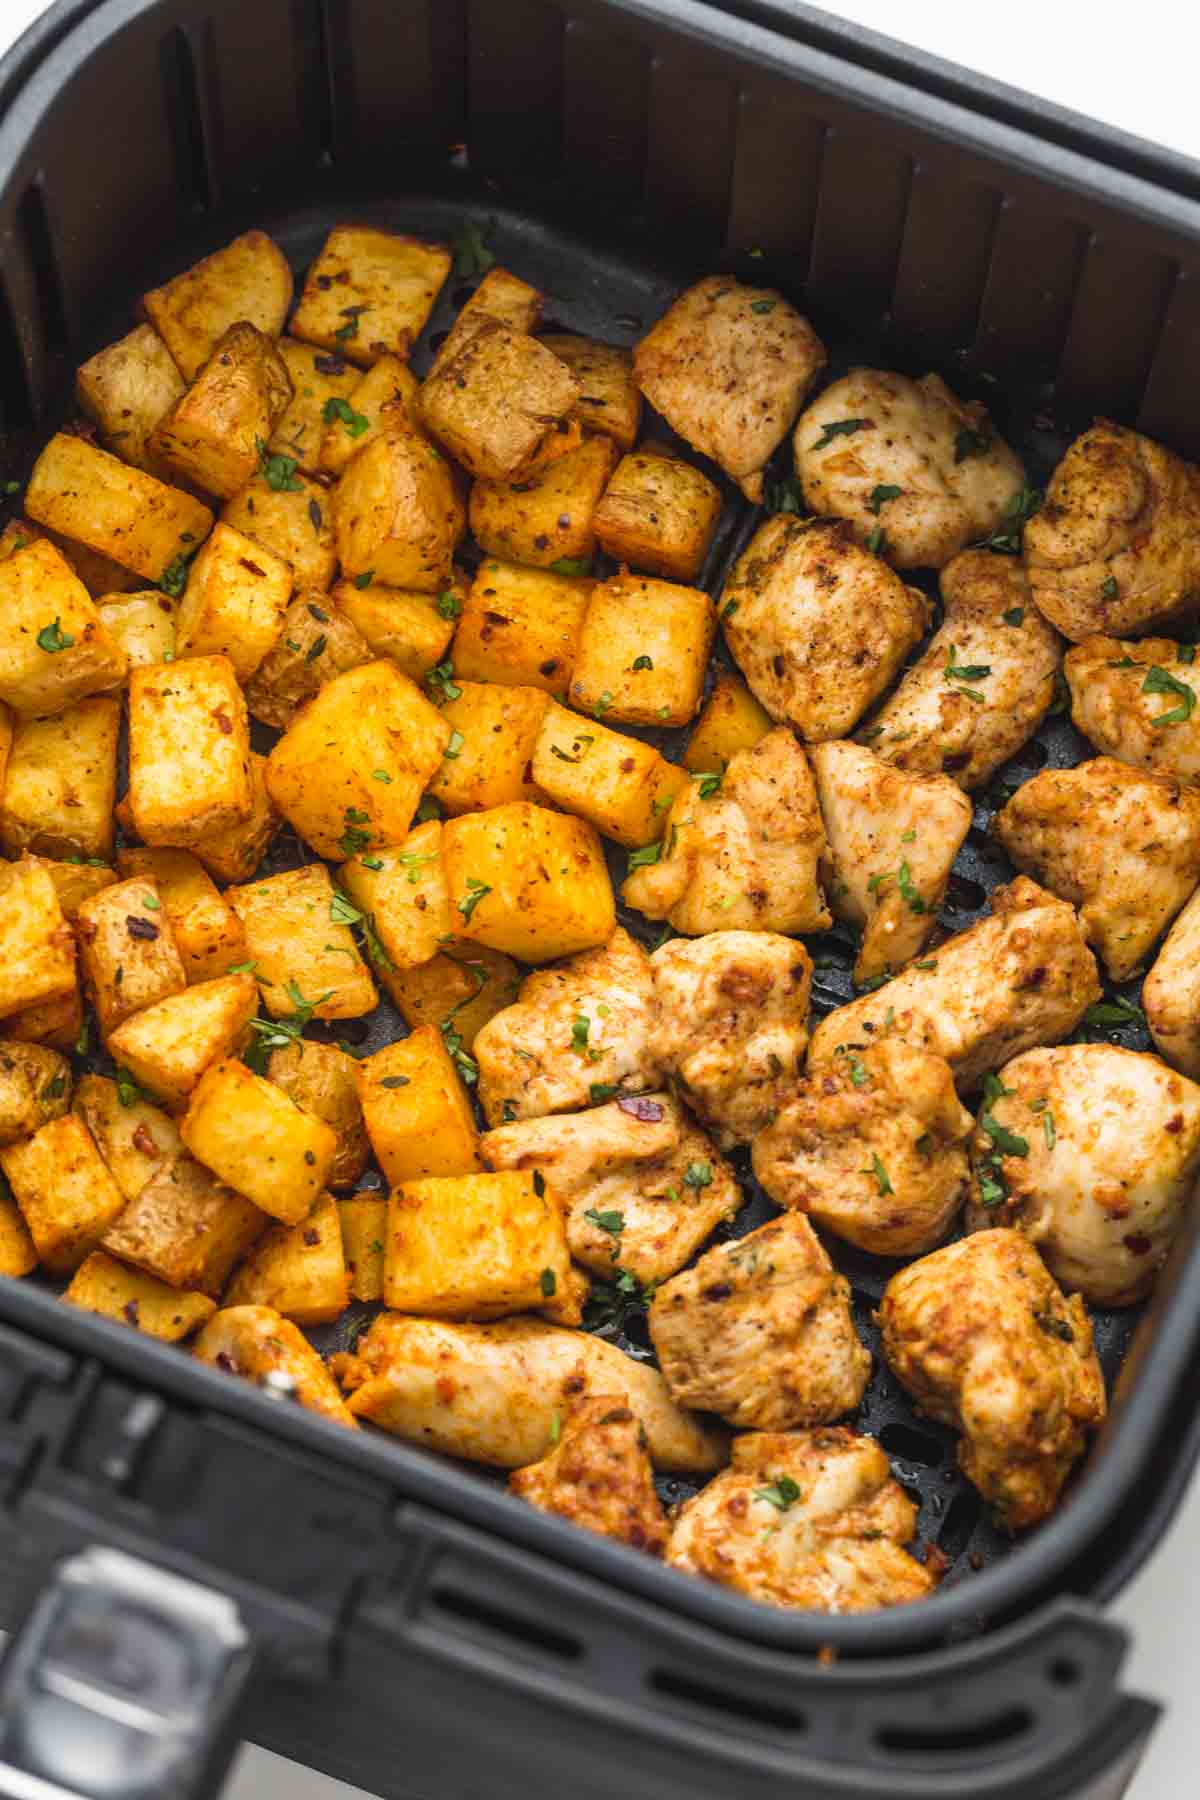 Roasted potatoes and chicken pieces in an air fryer basket